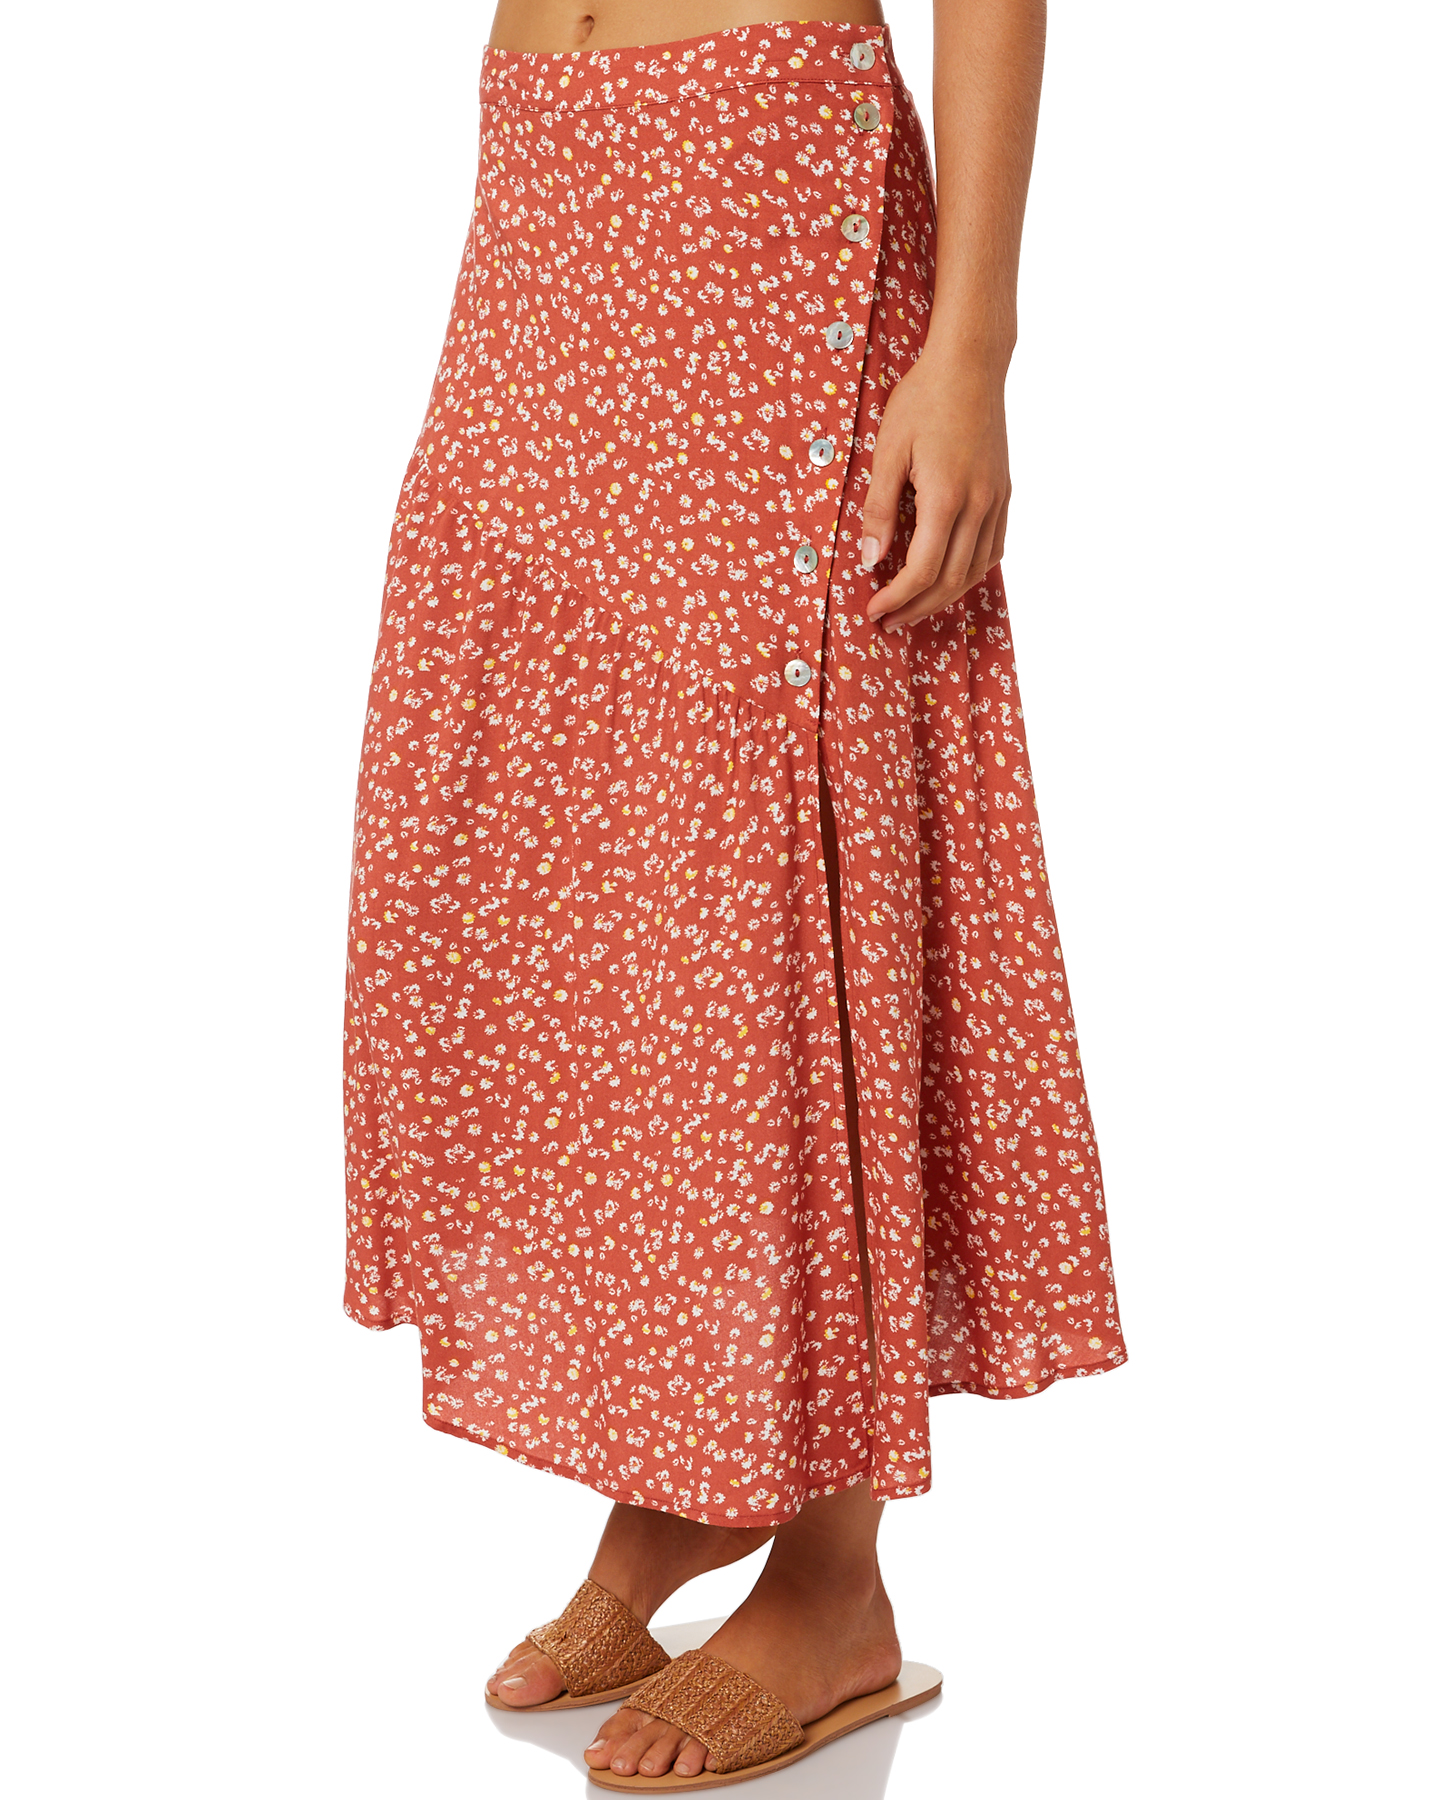 Elwood Freedom Skirt - Red Floral | SurfStitch